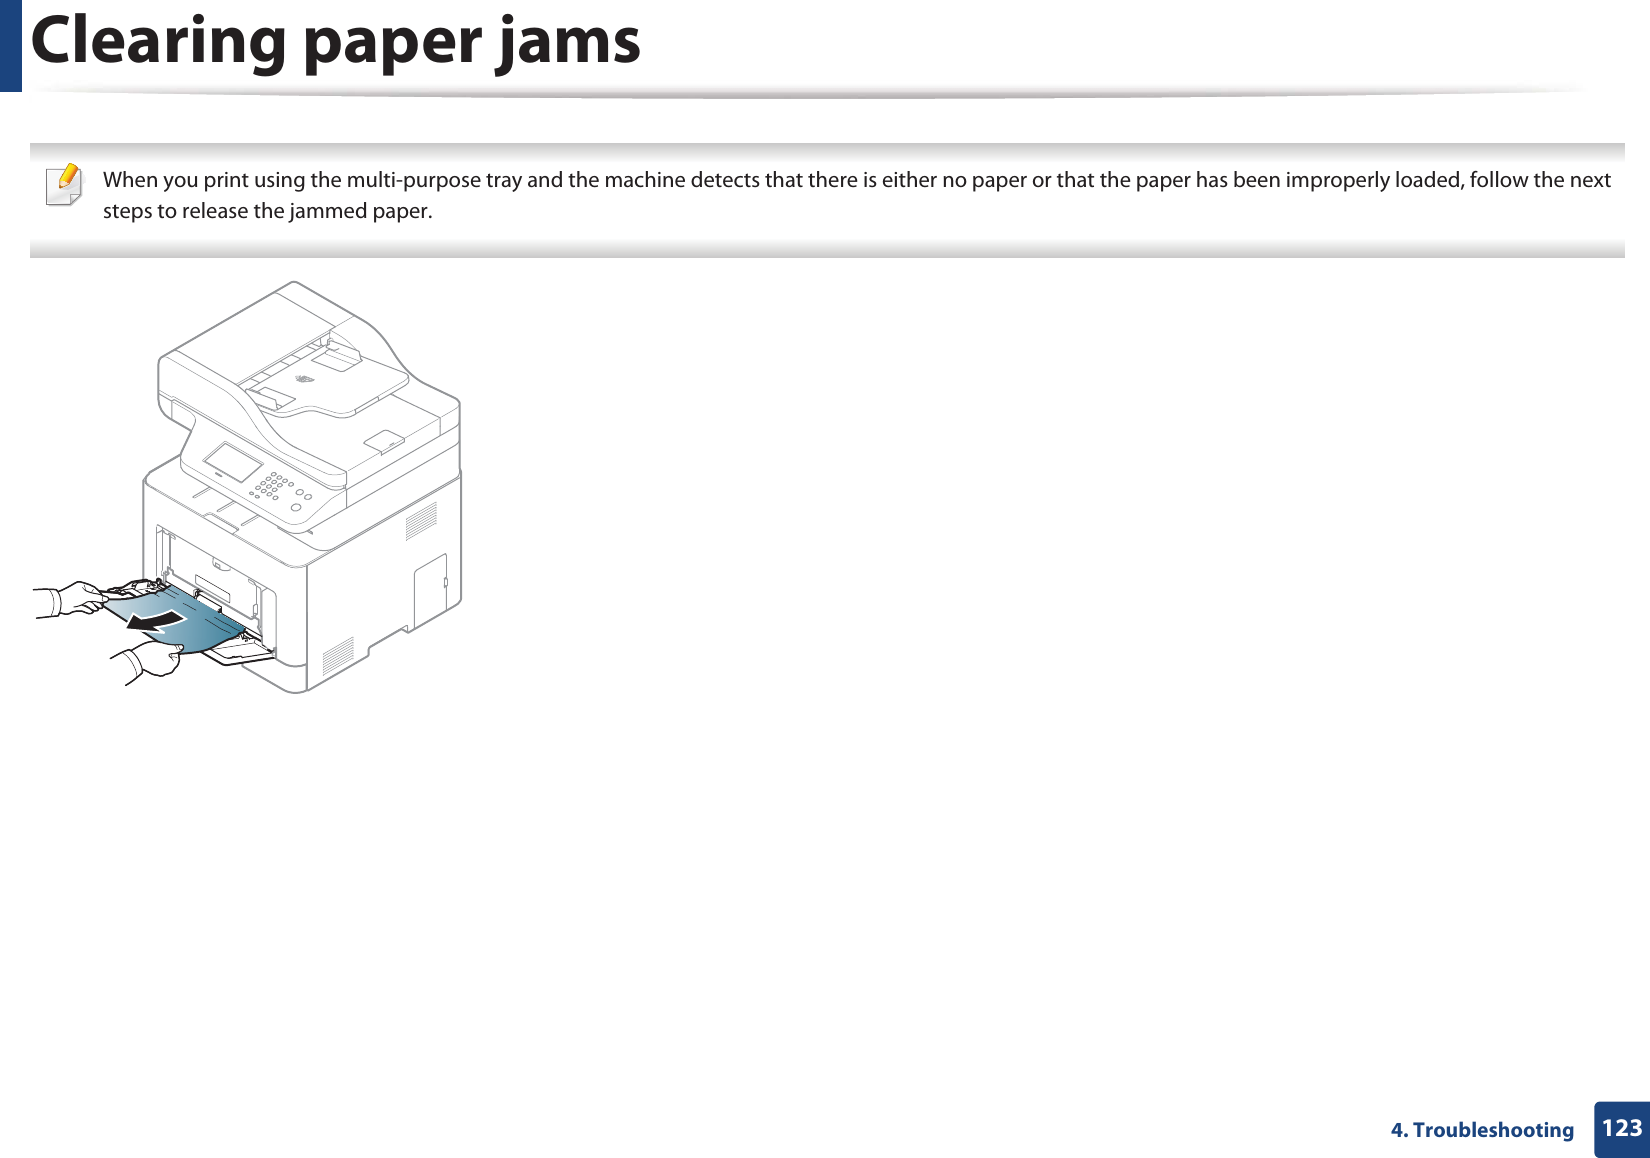 Clearing paper jams1234. Troubleshooting When you print using the multi-purpose tray and the machine detects that there is either no paper or that the paper has been improperly loaded, follow the next steps to release the jammed paper. 